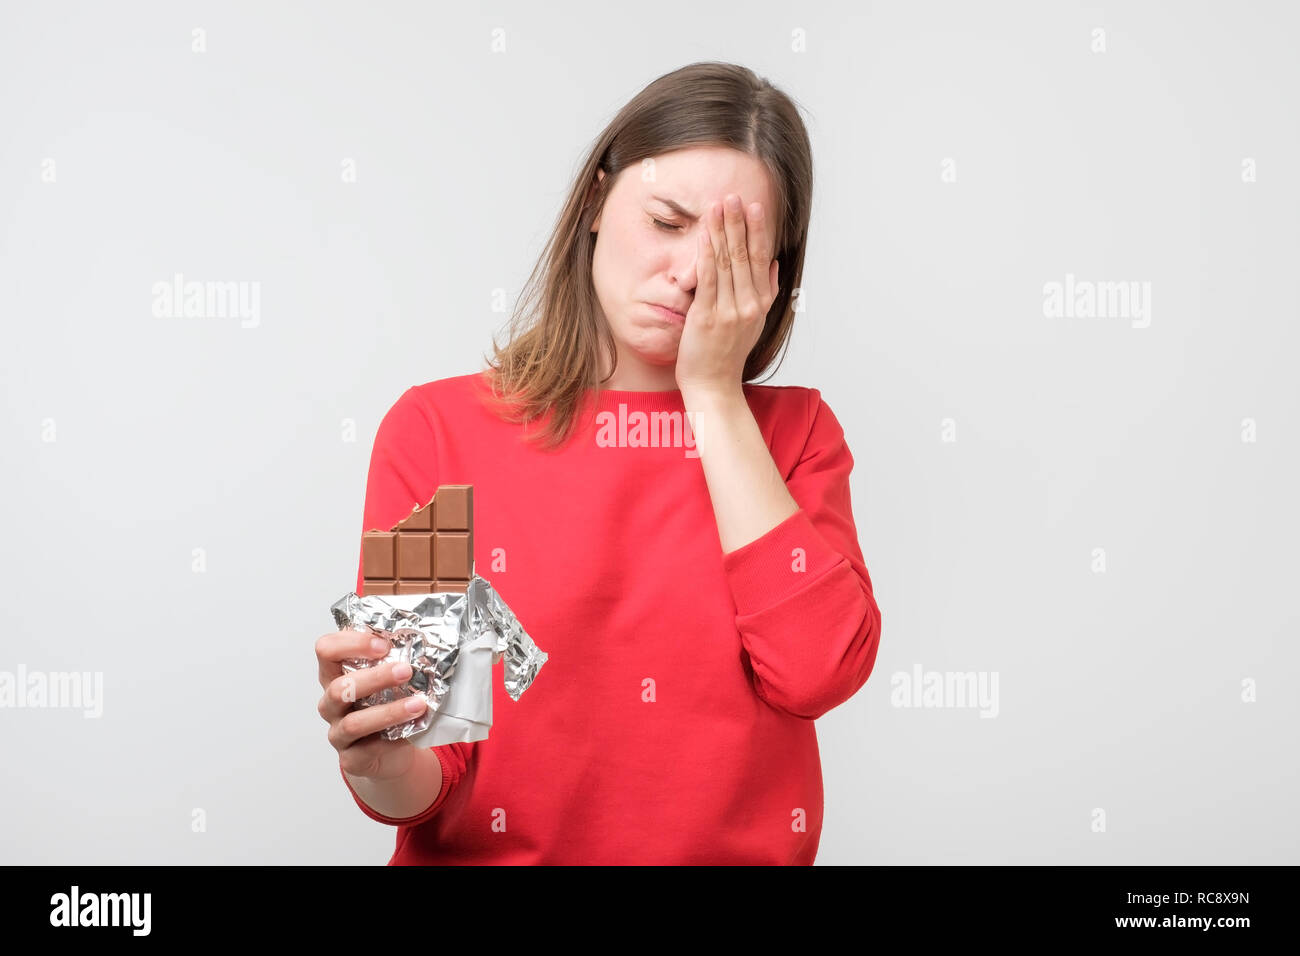 Sad young woman tired of diet restrictions holding sweet chocolate isolated on gray wall background. Nutrition concept. Feelings of guilt Stock Photo